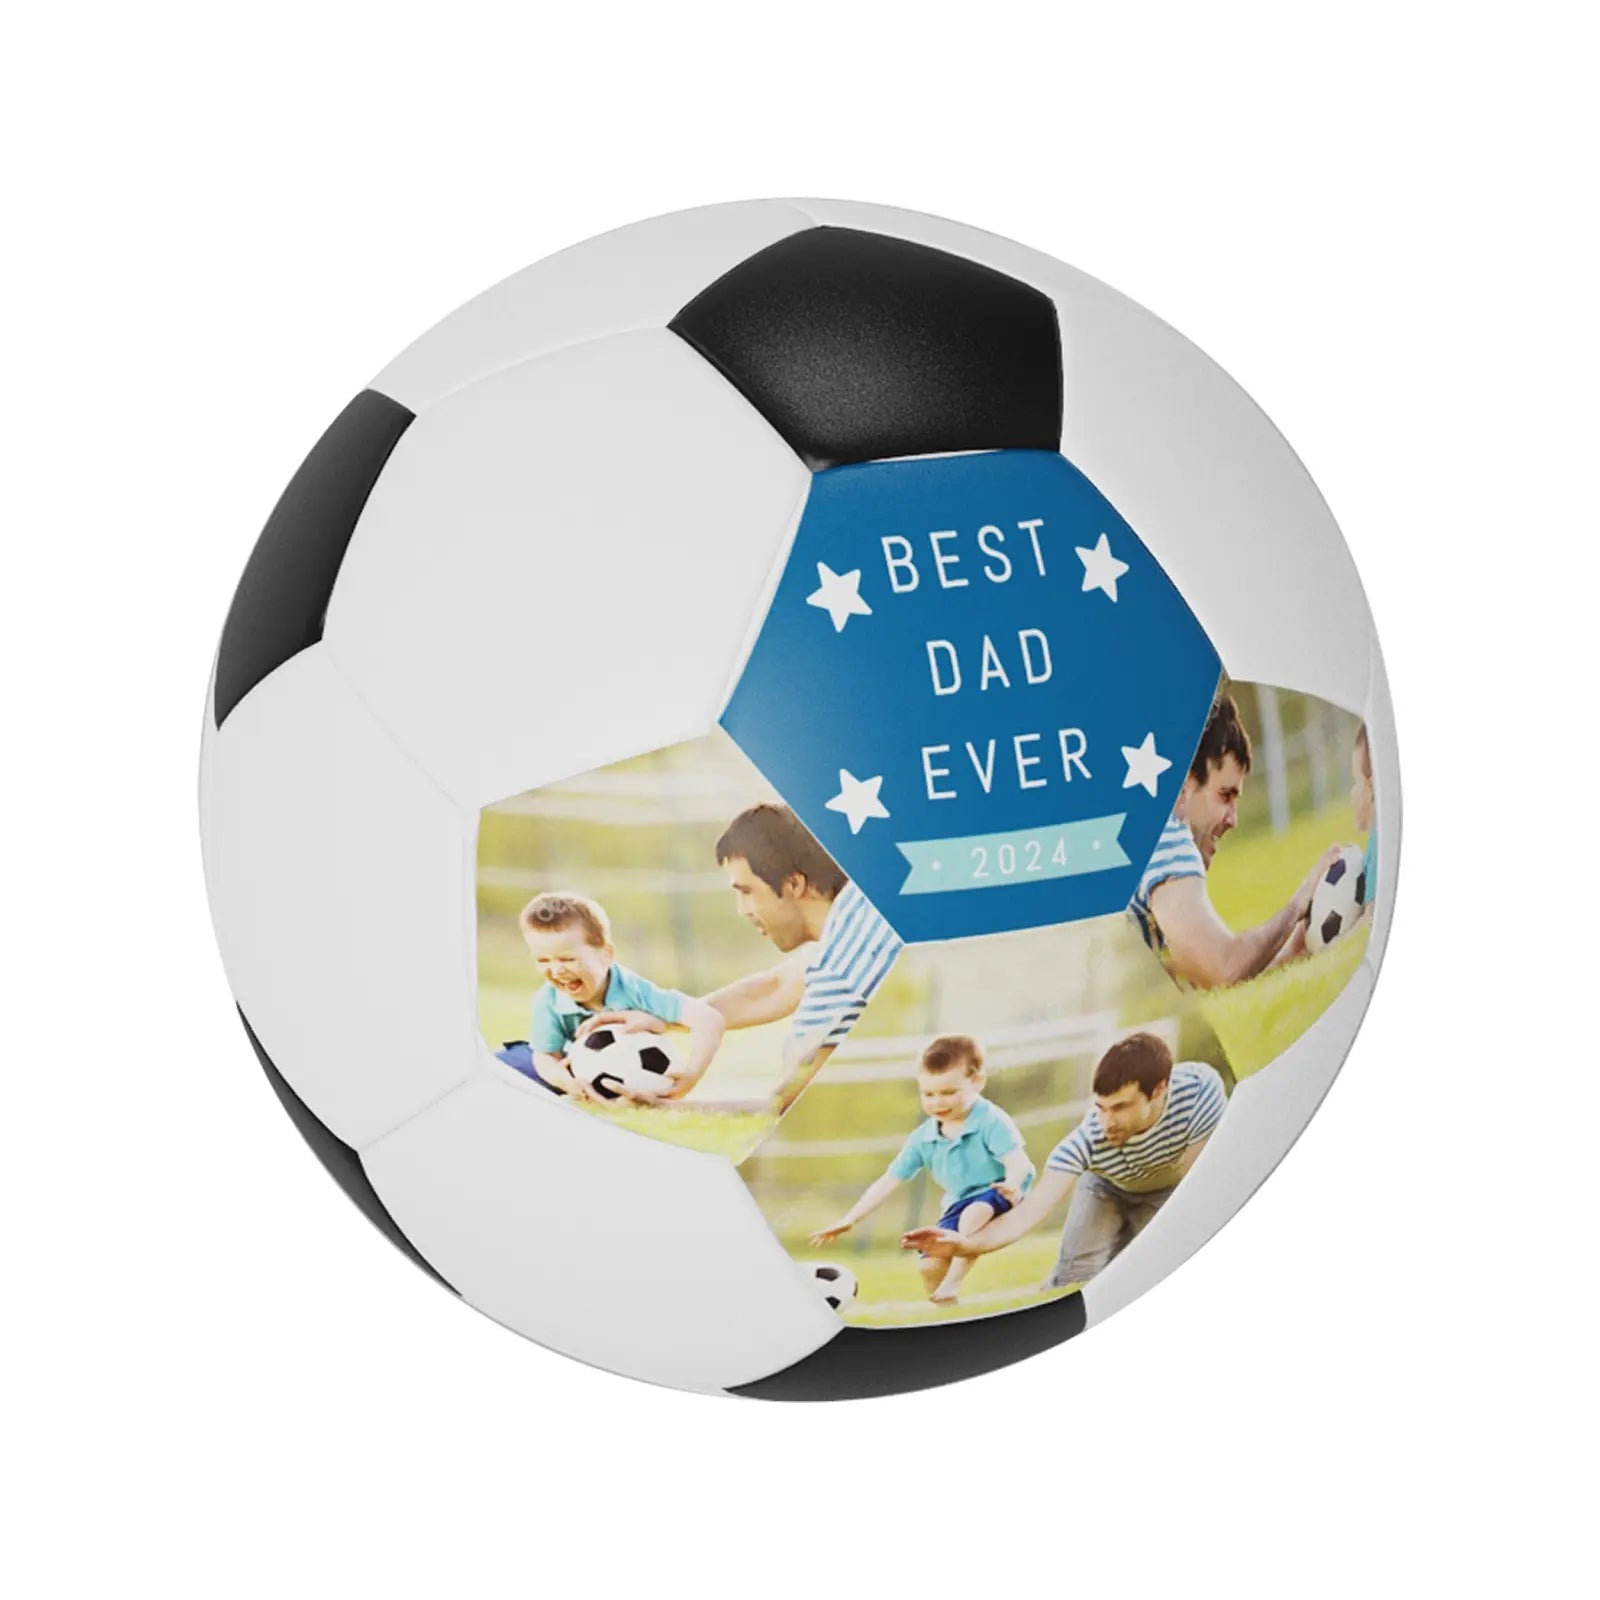 Best Dad Ever Custom Photo Soccer Ball - Family Watchs